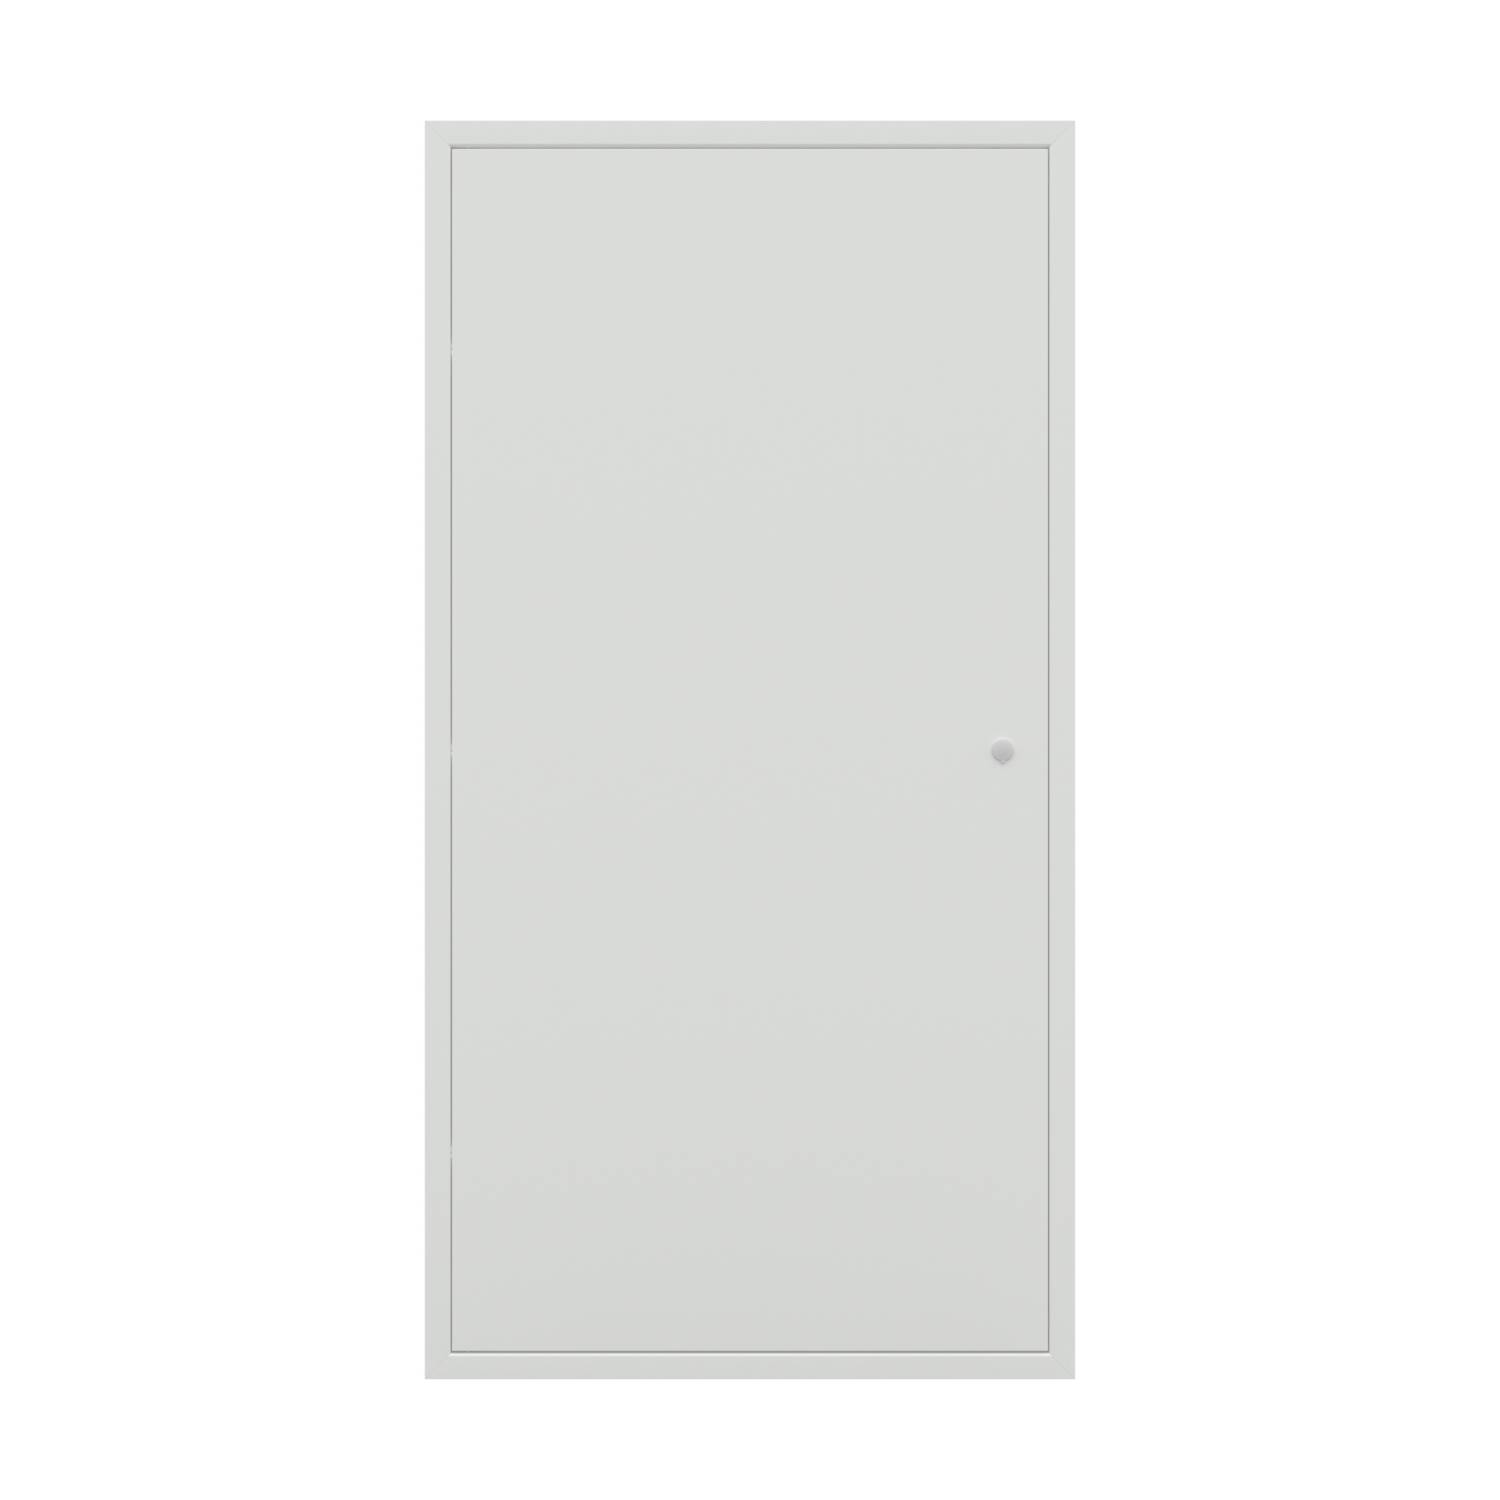 Metal Riser Door (EX51 Range) - Picture Frame - 2 Hour Fire Rated From the Face & Rear - Smoke Tested - 36dB Acoustic - Riser Door